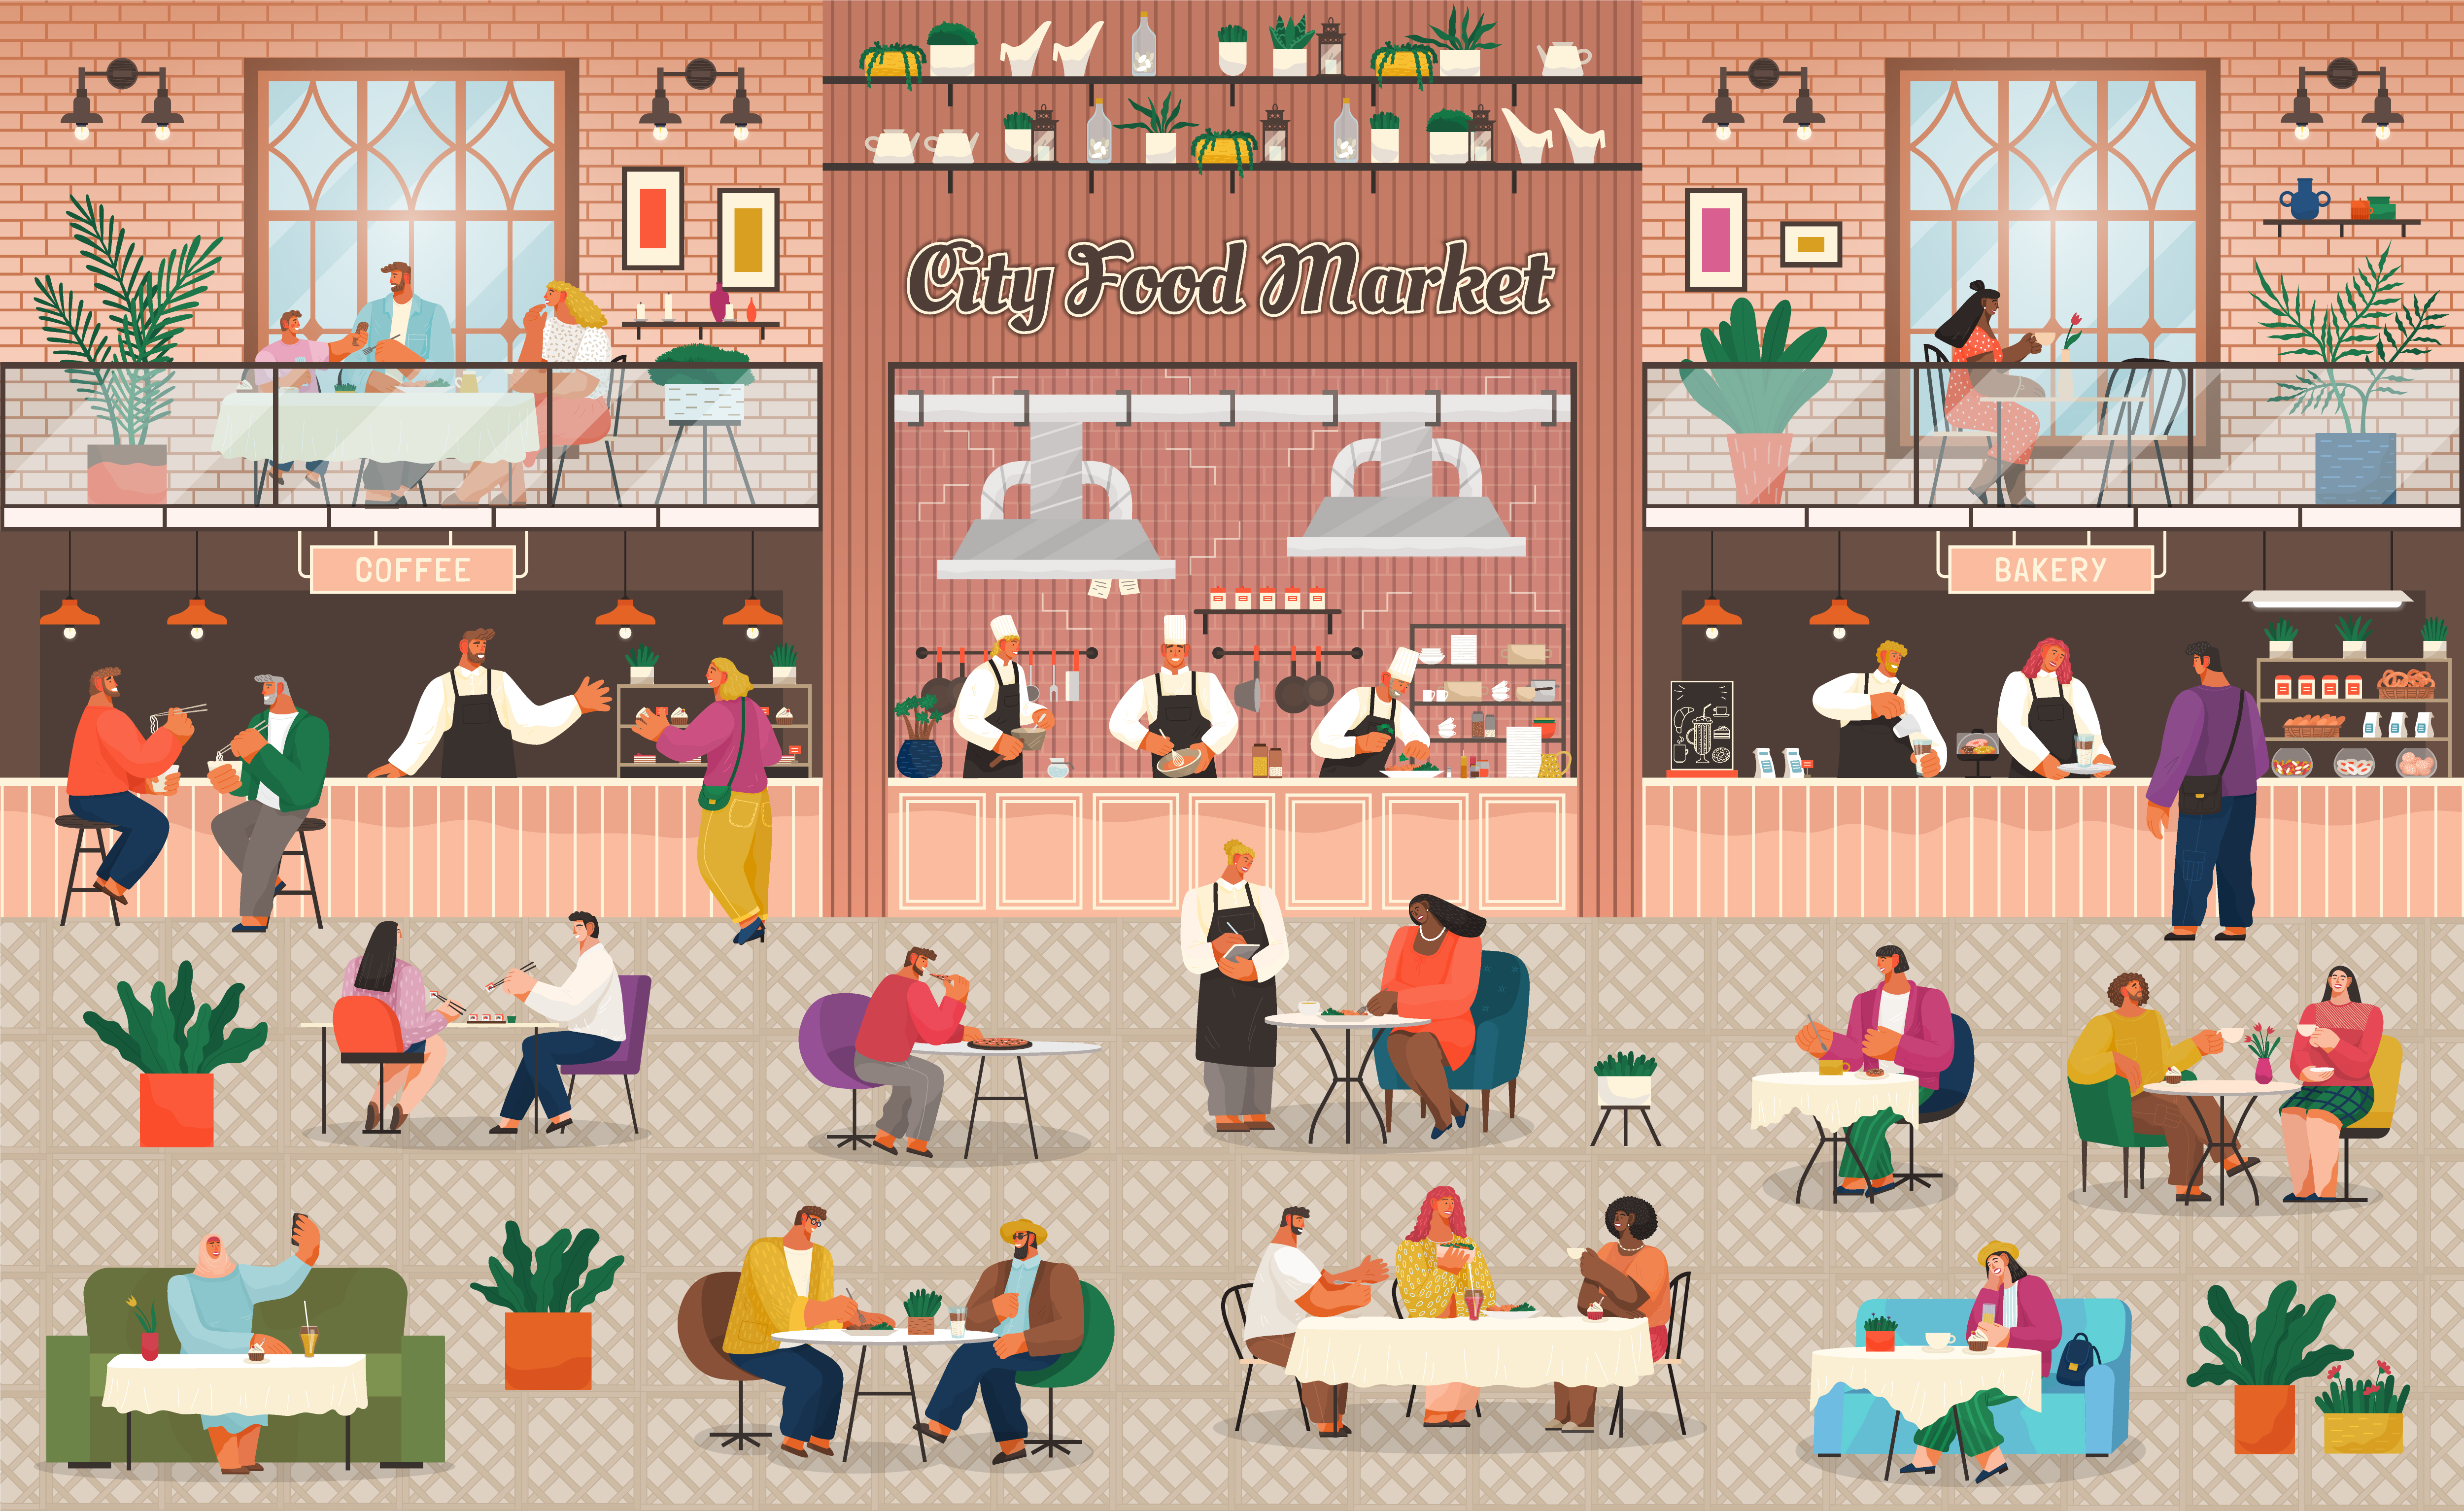 People eat in food court in shopping mall, city food market, eating out vector. Buying snacks or fastfood, coffee and bakery, drinks kiosk. Characters at tables, supermarket interior illustration. Food Court in Shopping Mall, Eating Out, Market